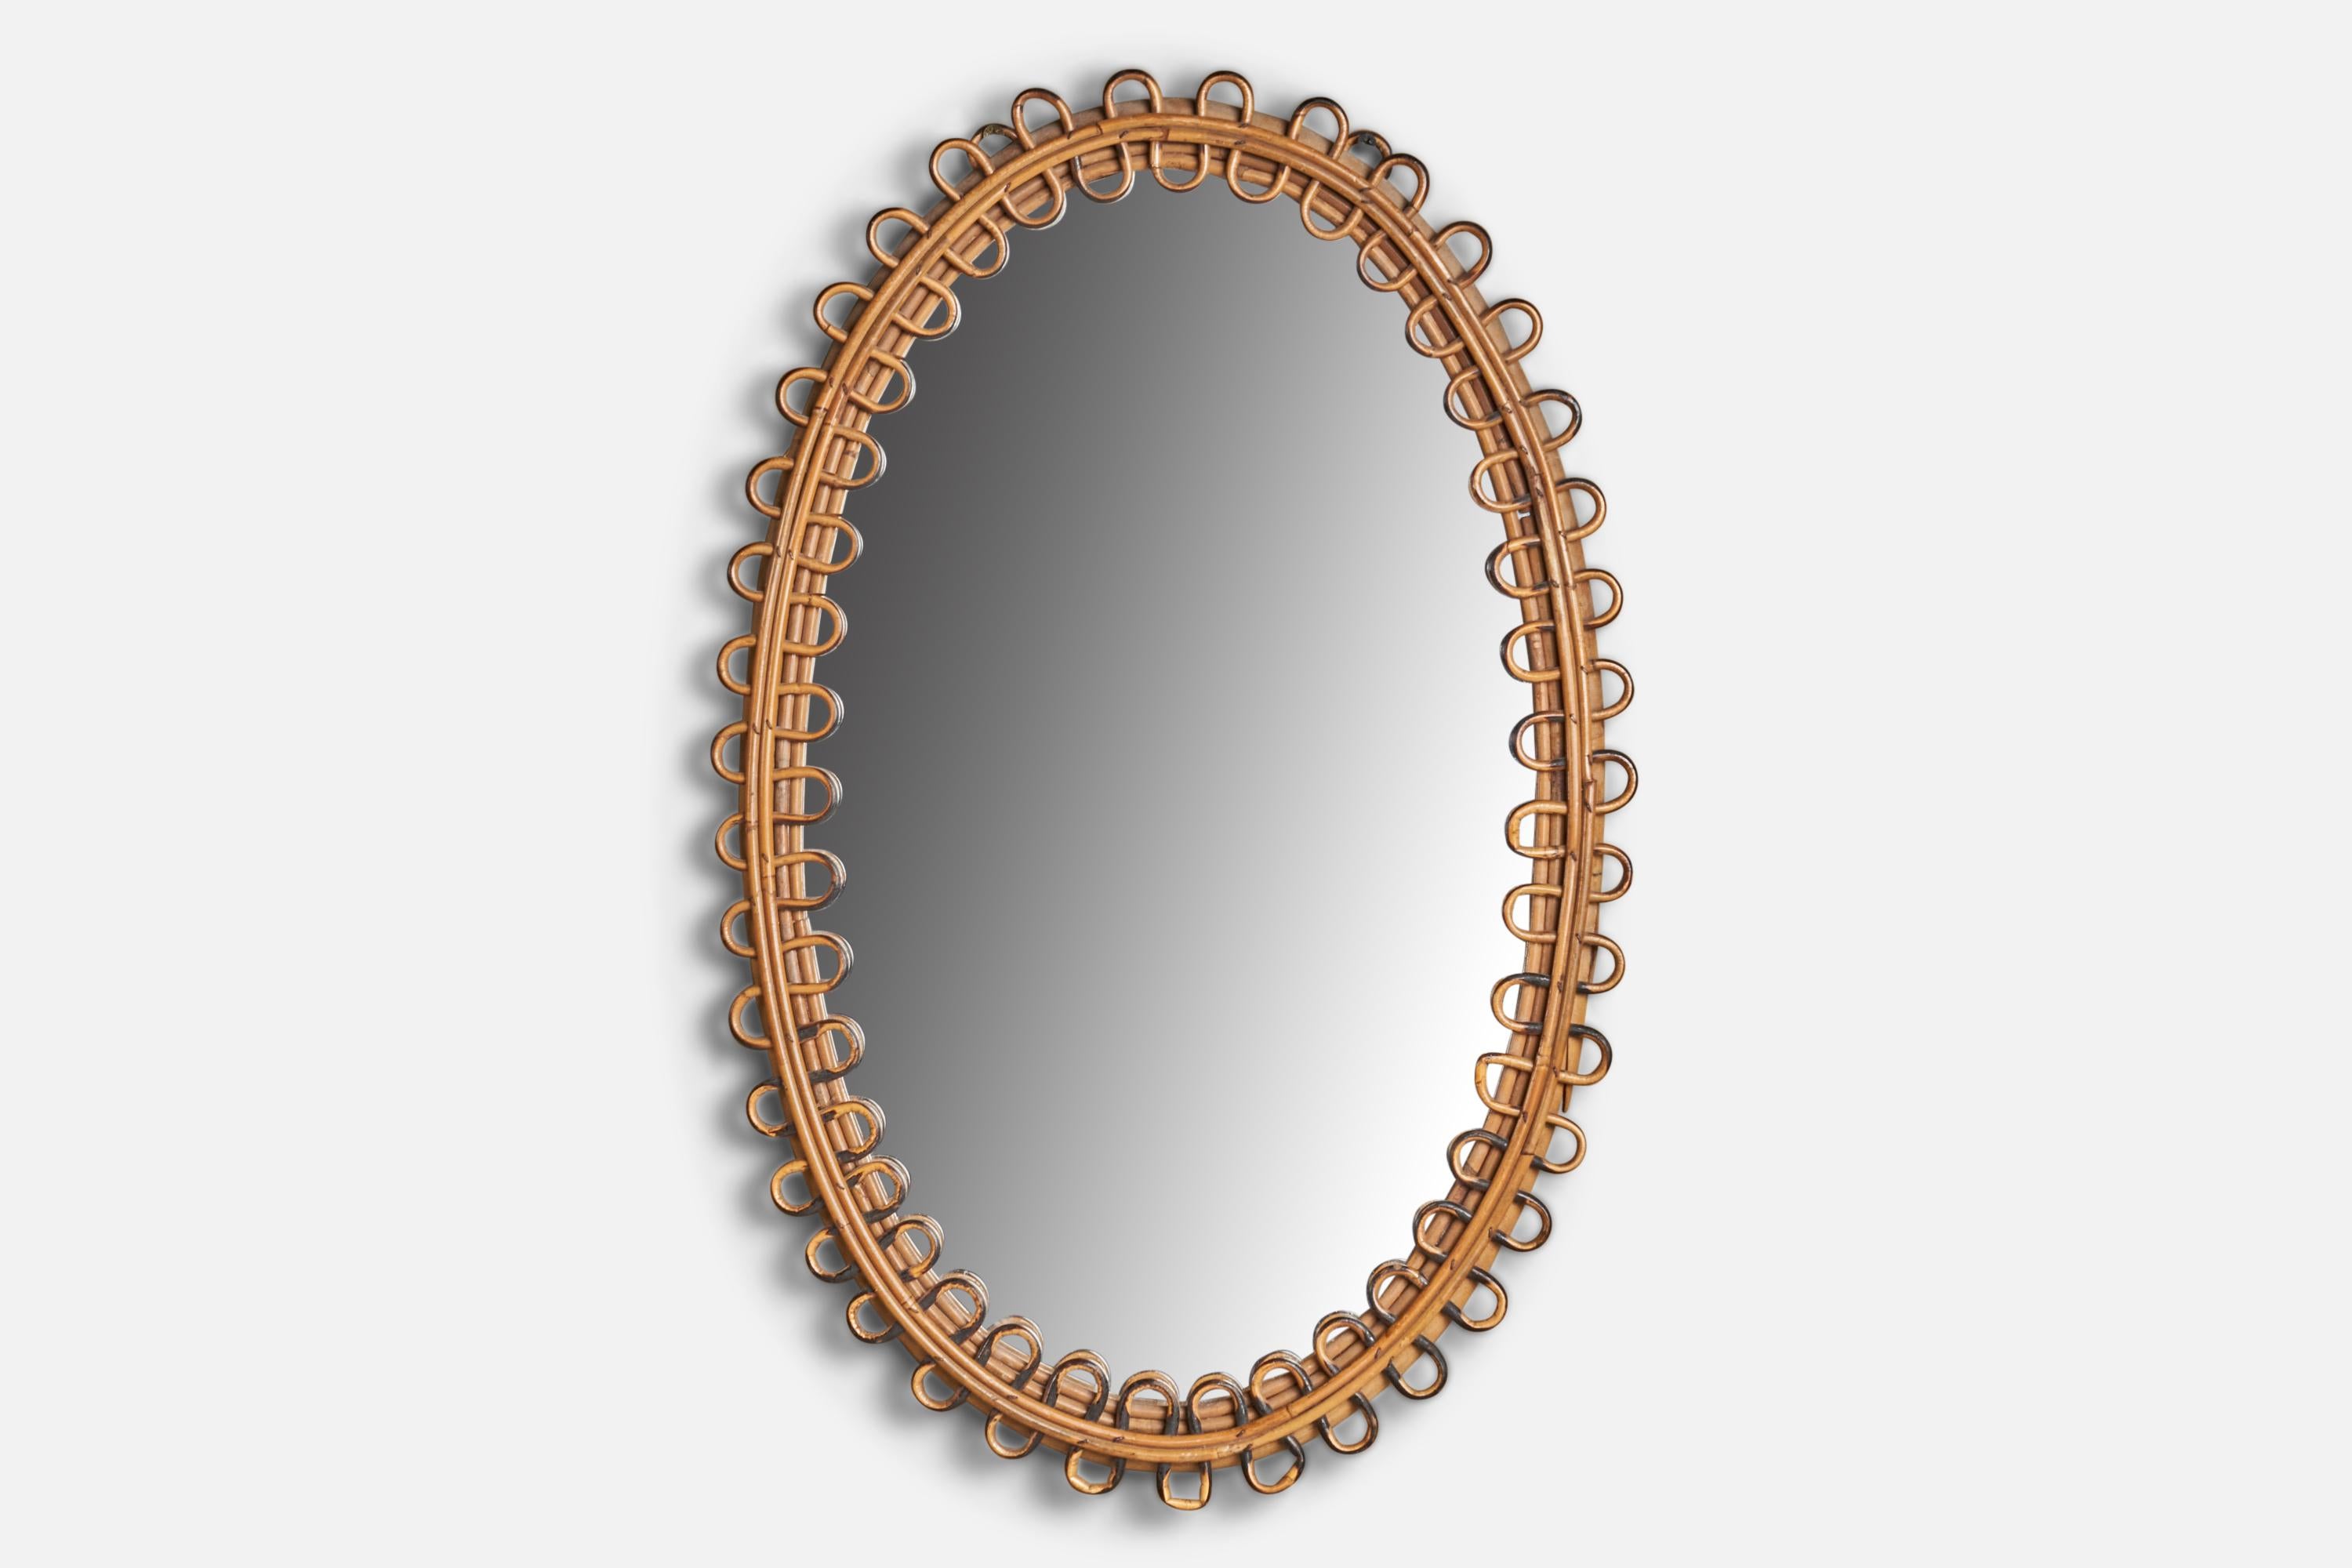 A rattan wall mirror designed and produced in Italy, c. 1960s.